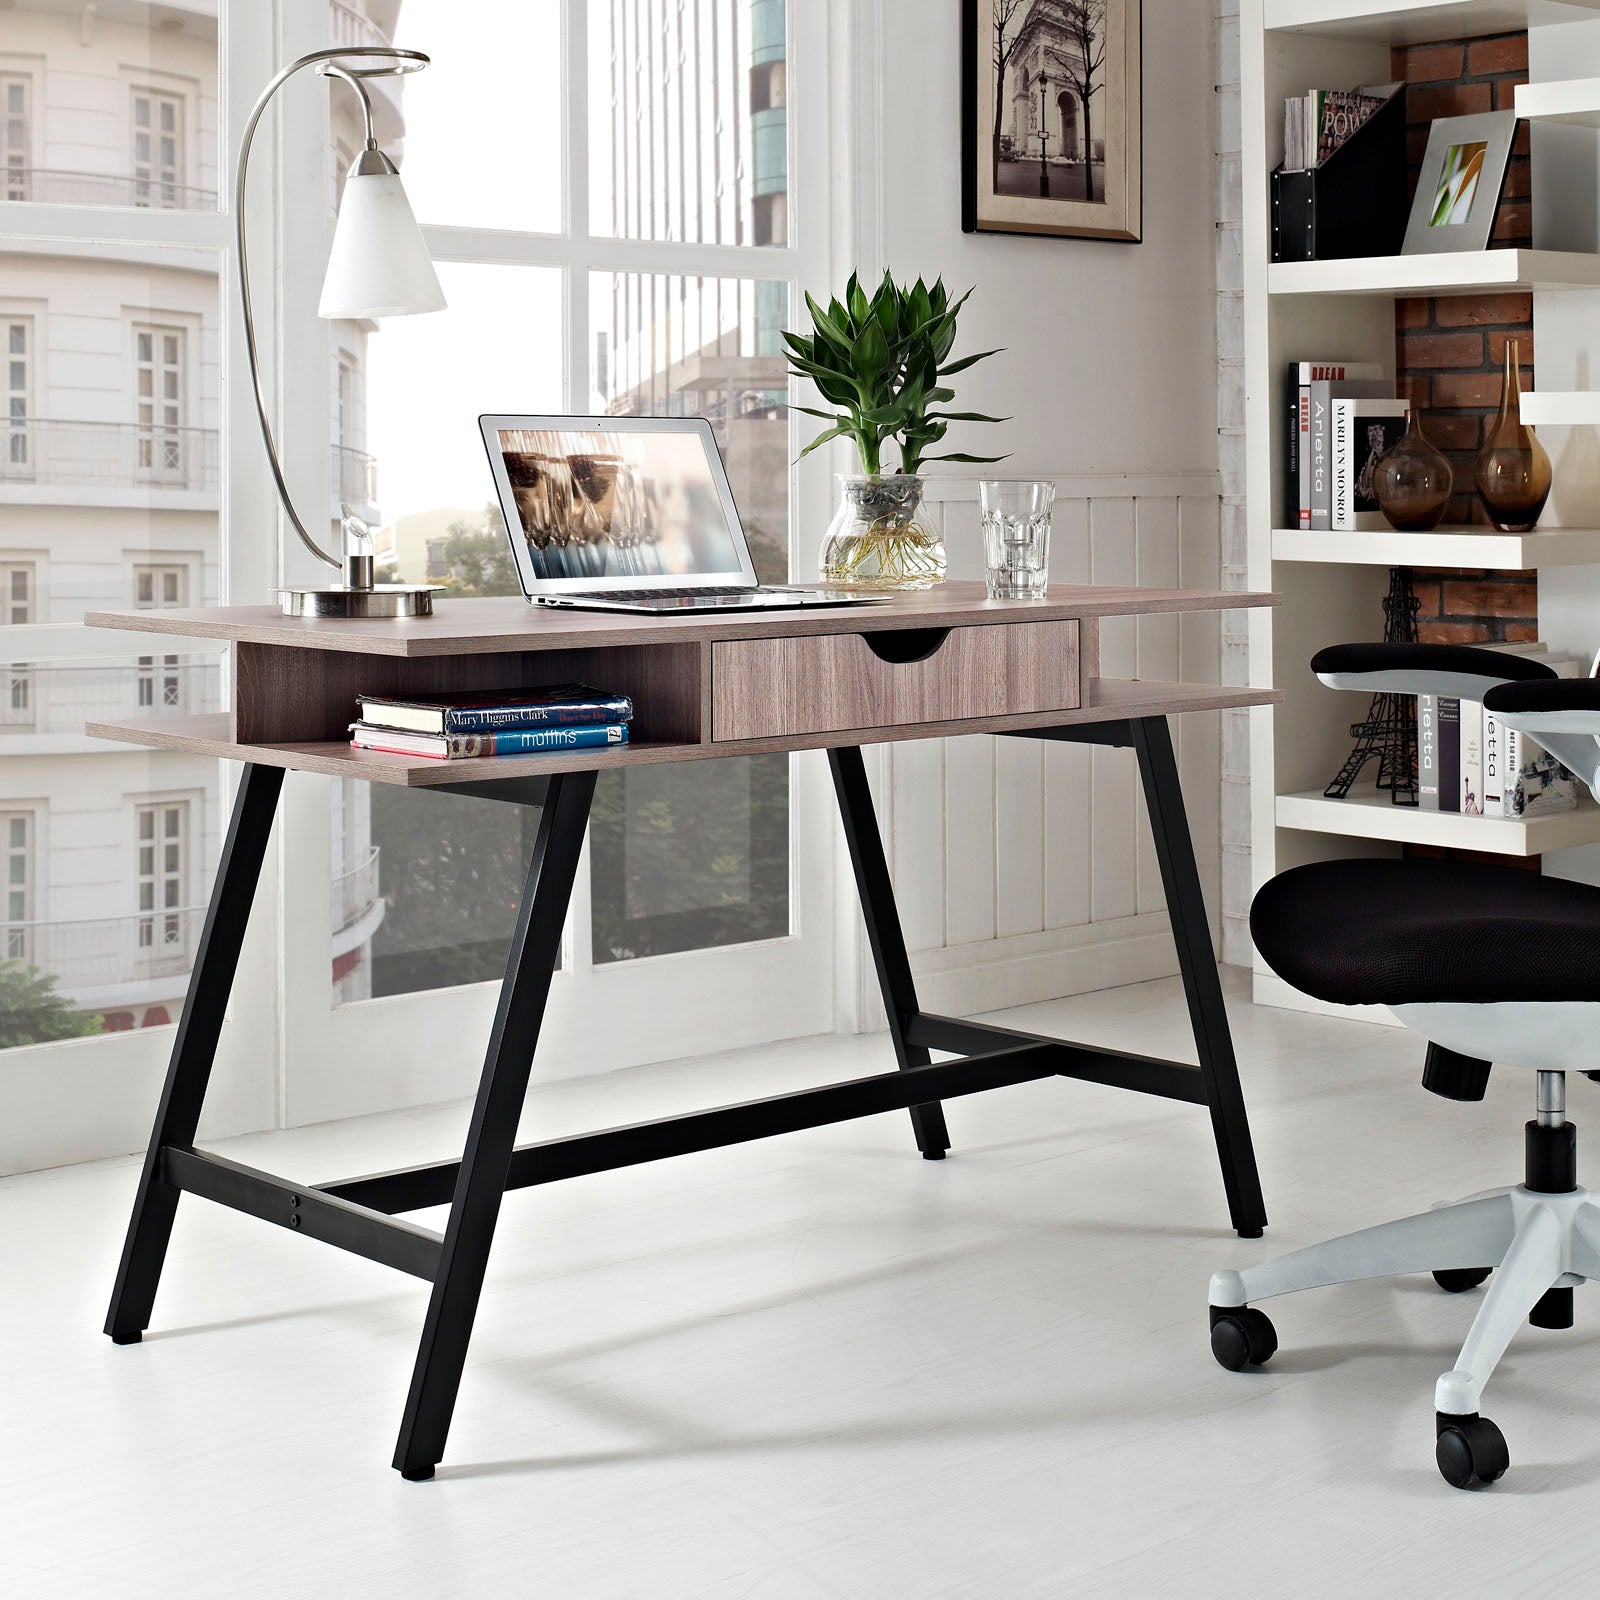 Turnabout Office Desk - East Shore Modern Home Furnishings